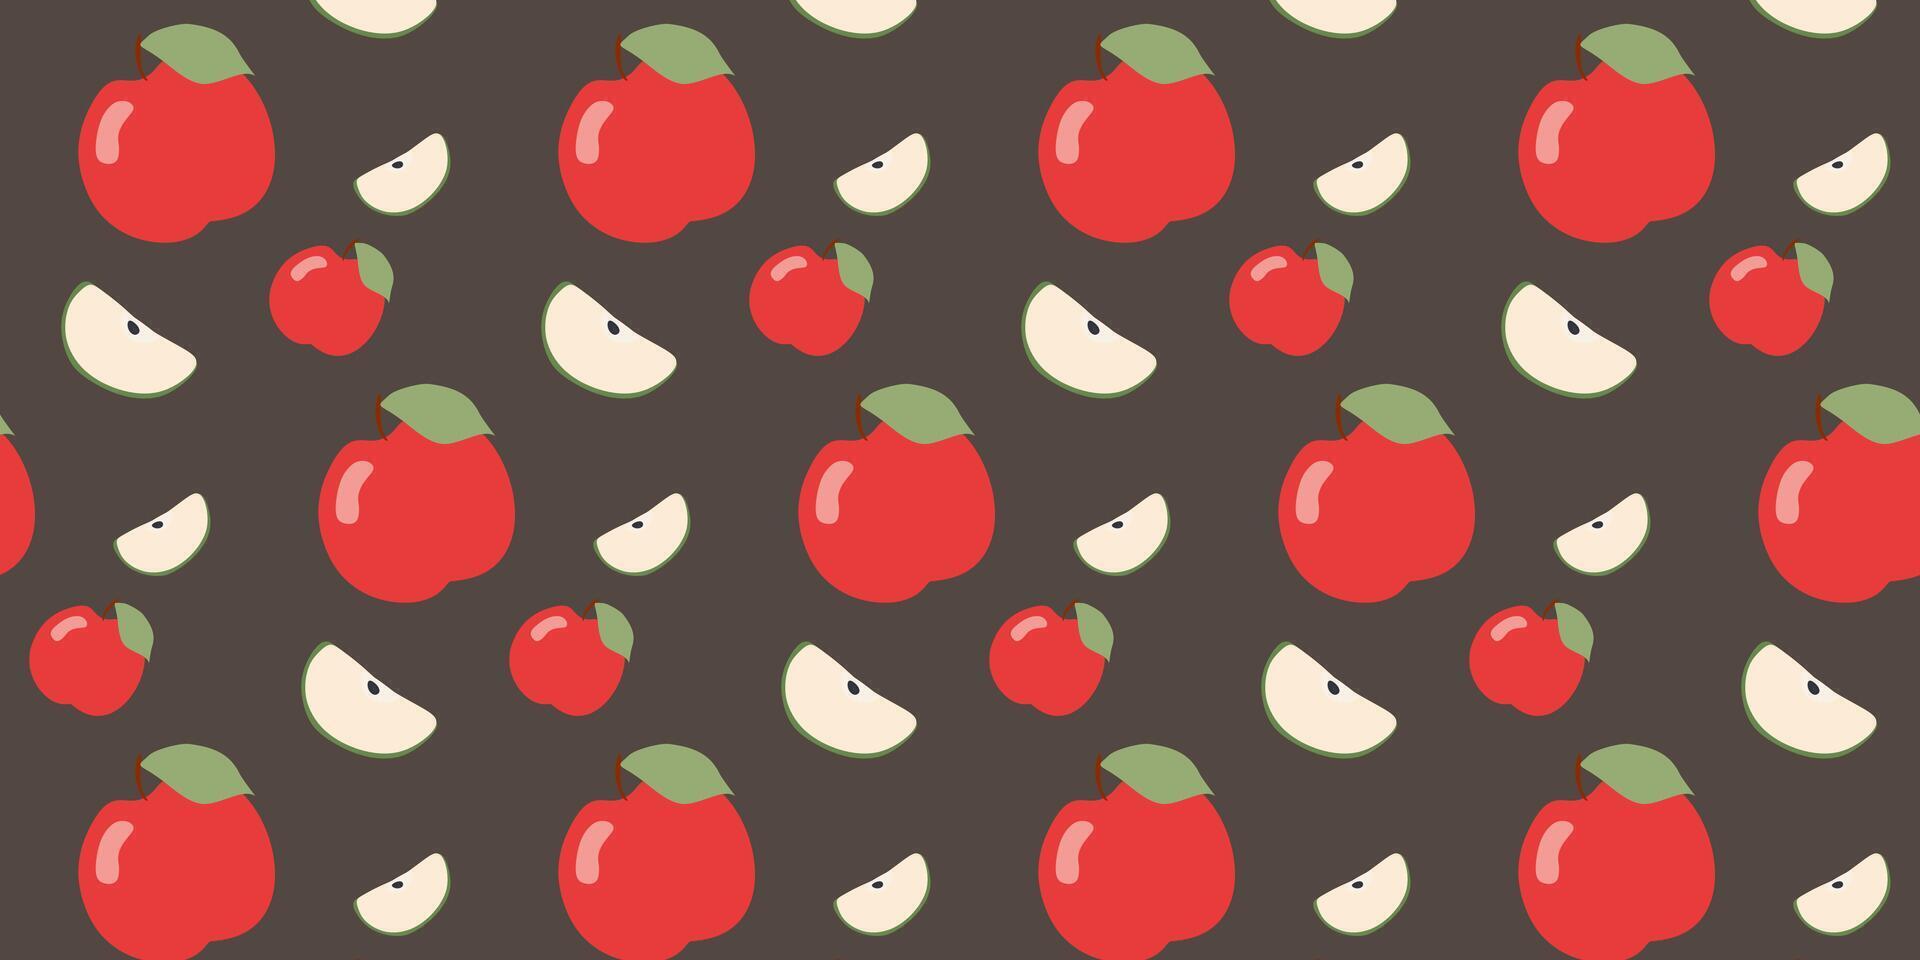 Red Apples and Slices Seamless pattern. Flat Cartoon Illustration. Tasty and Juice fruits isolated on Dark background. Color Summer or Autumn template for Wrapping, Print, Textile, Clothes. vector